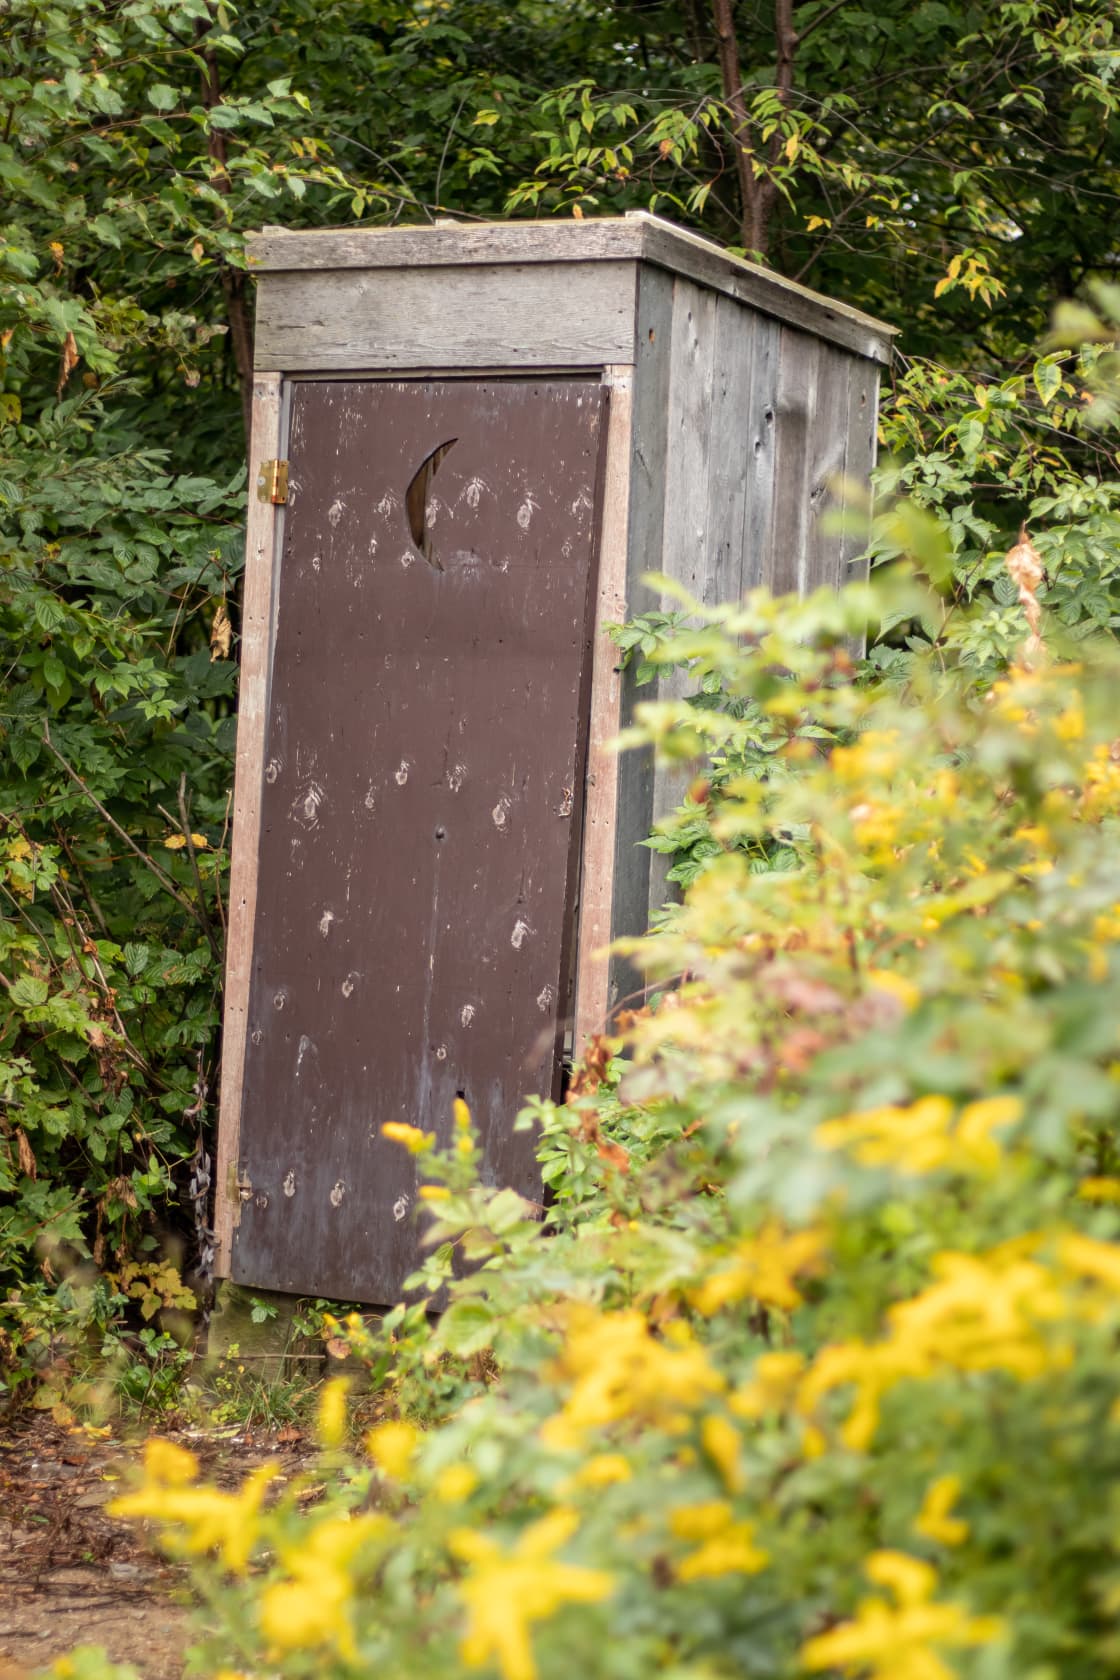 The outhouse is just a short walk down a trail, complete with TP and wood shavings.